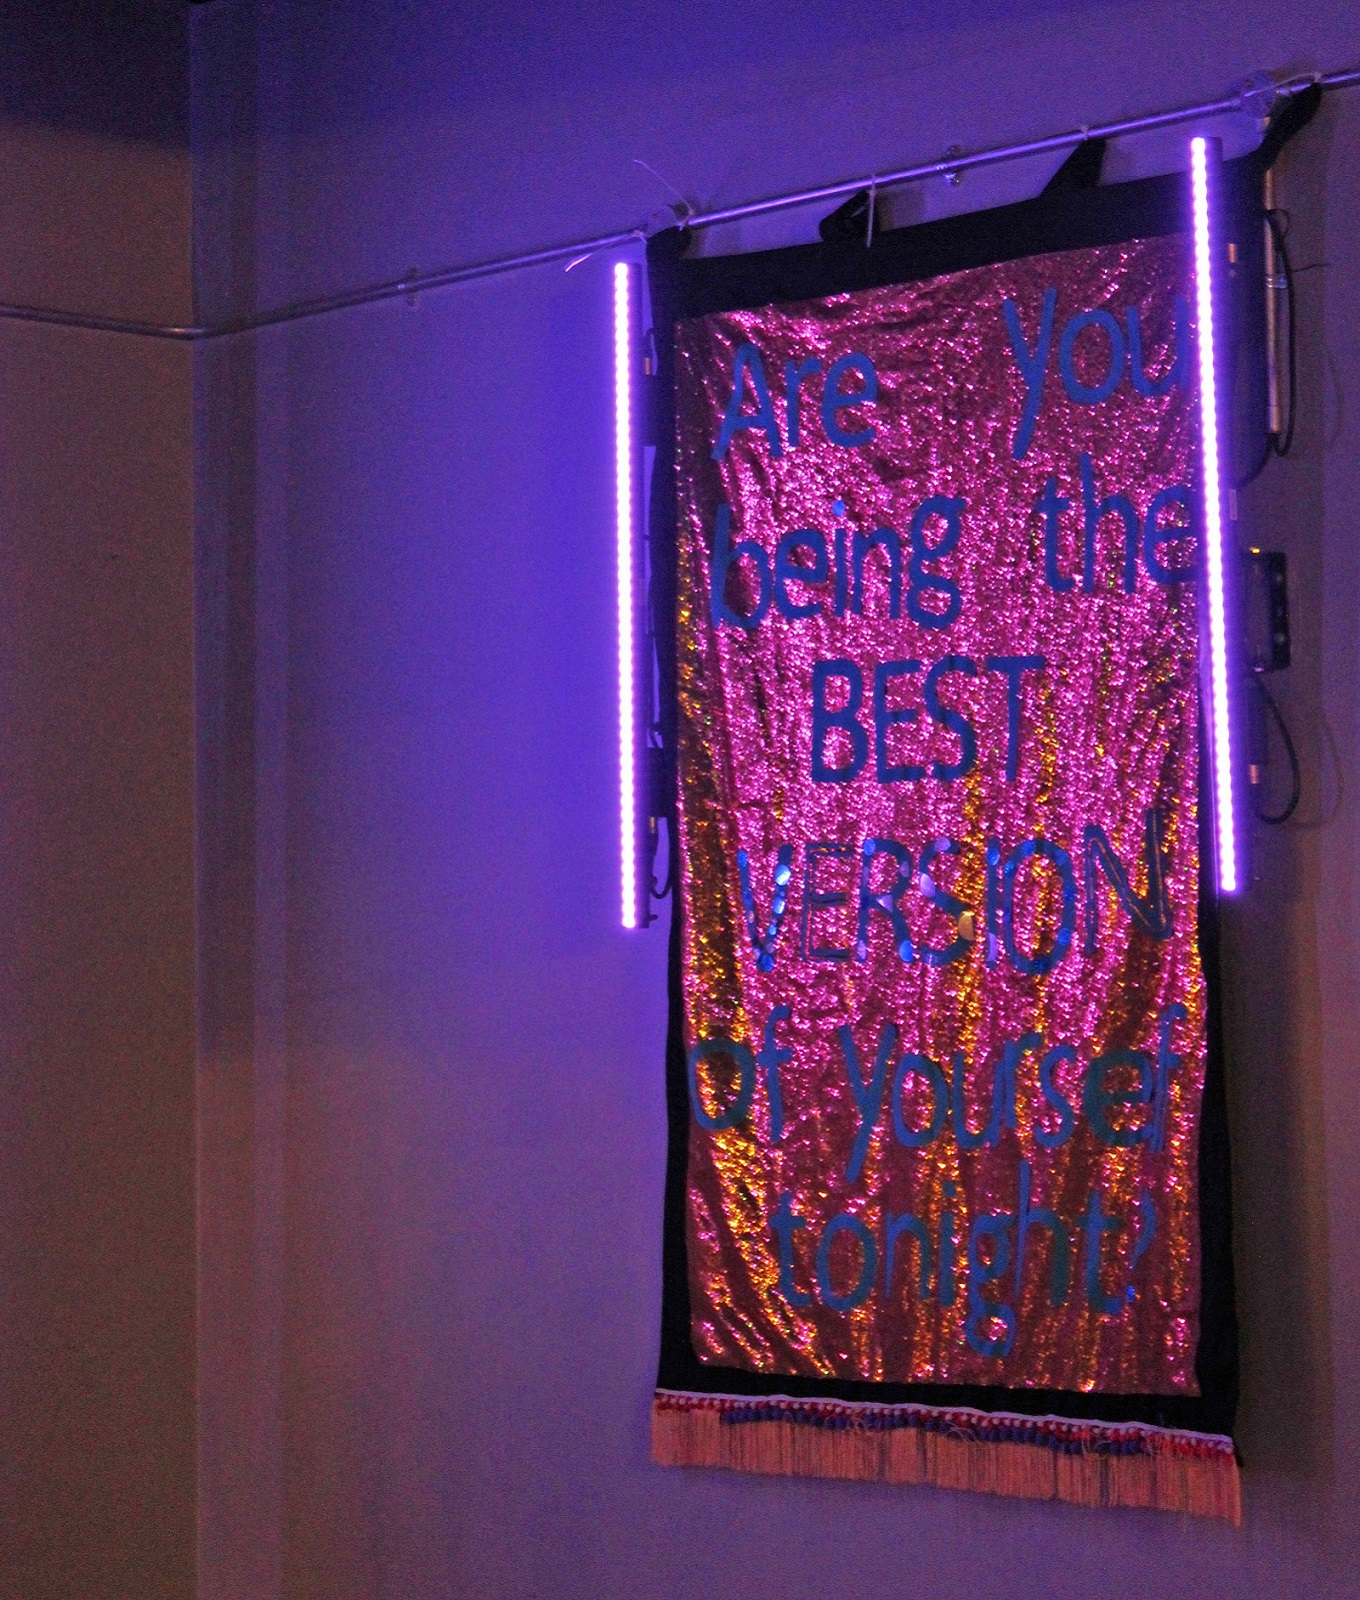 A sequined banner on a wall in a purple lit club room saying Are You Being The Best Version Of Yourself Tonight